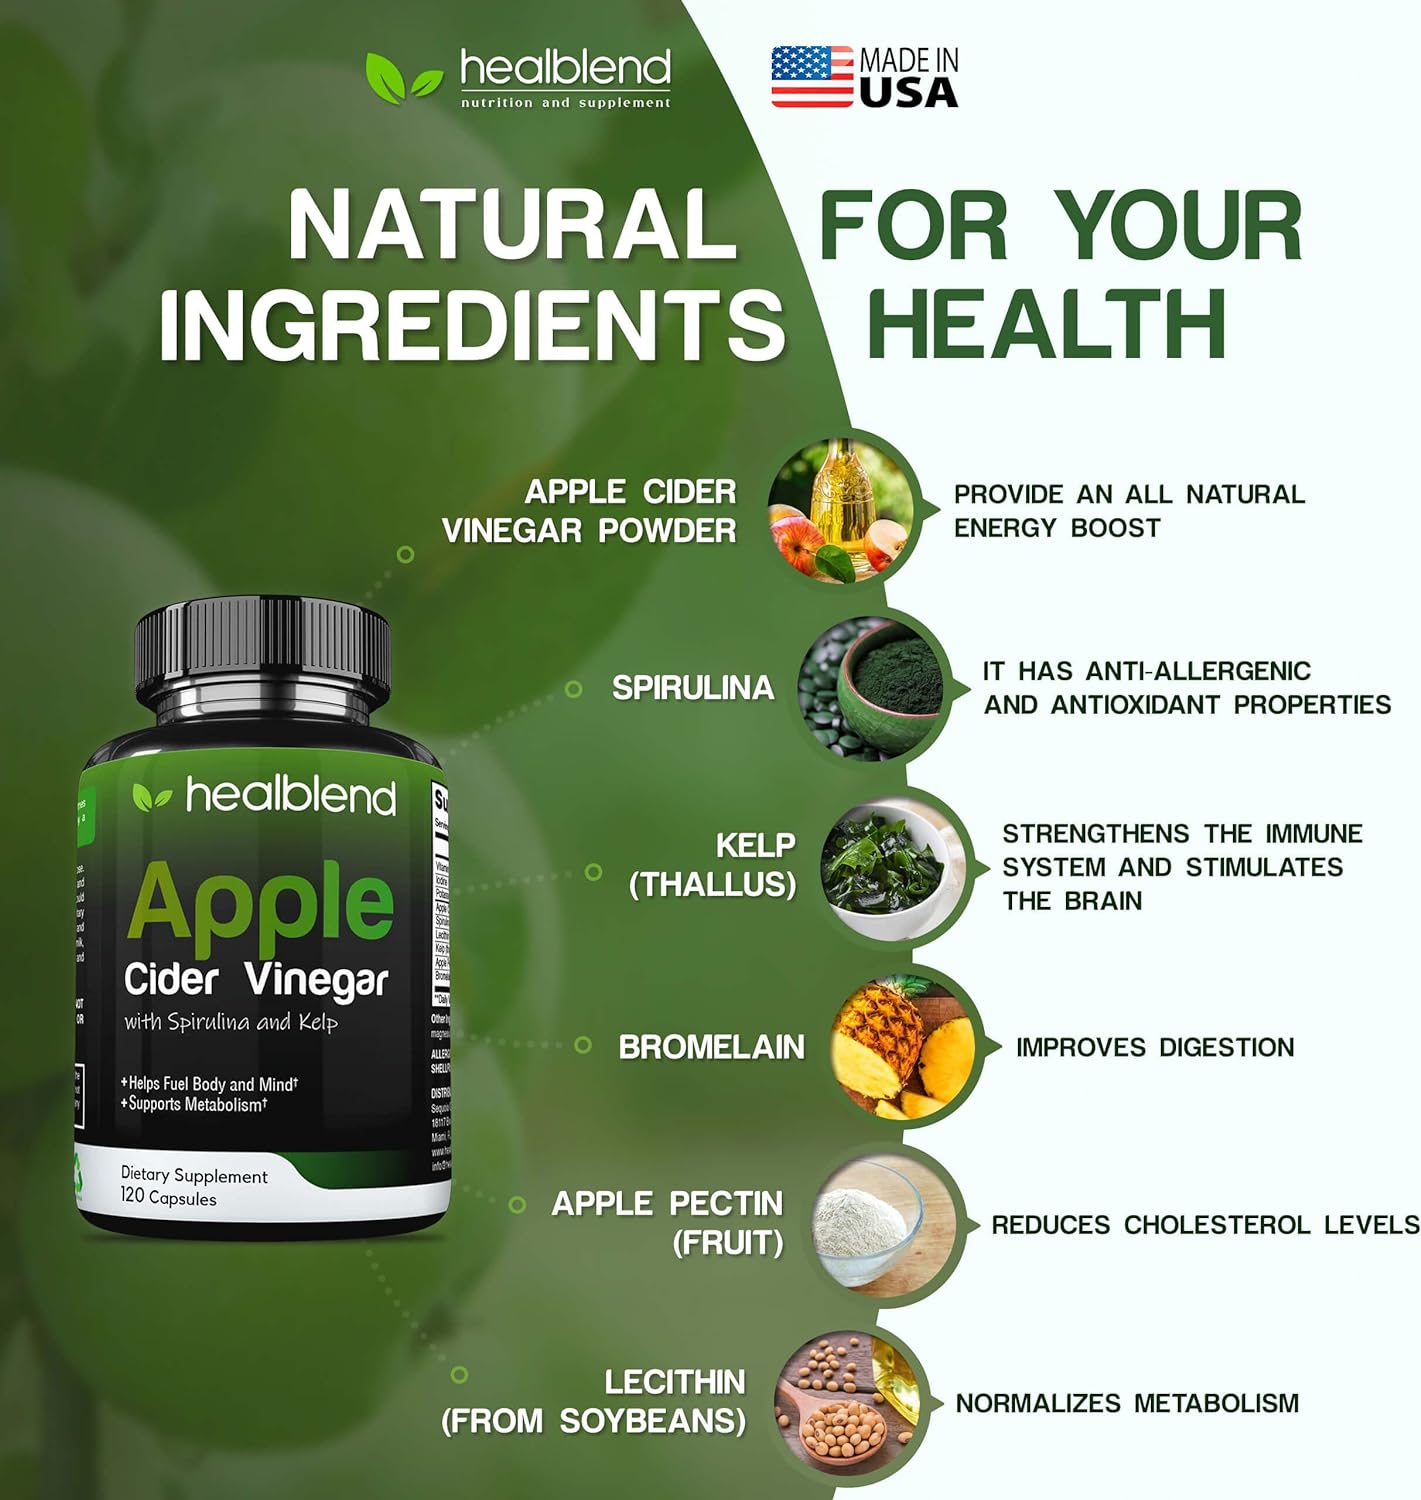 ACV with Spirulina & MCT Oil